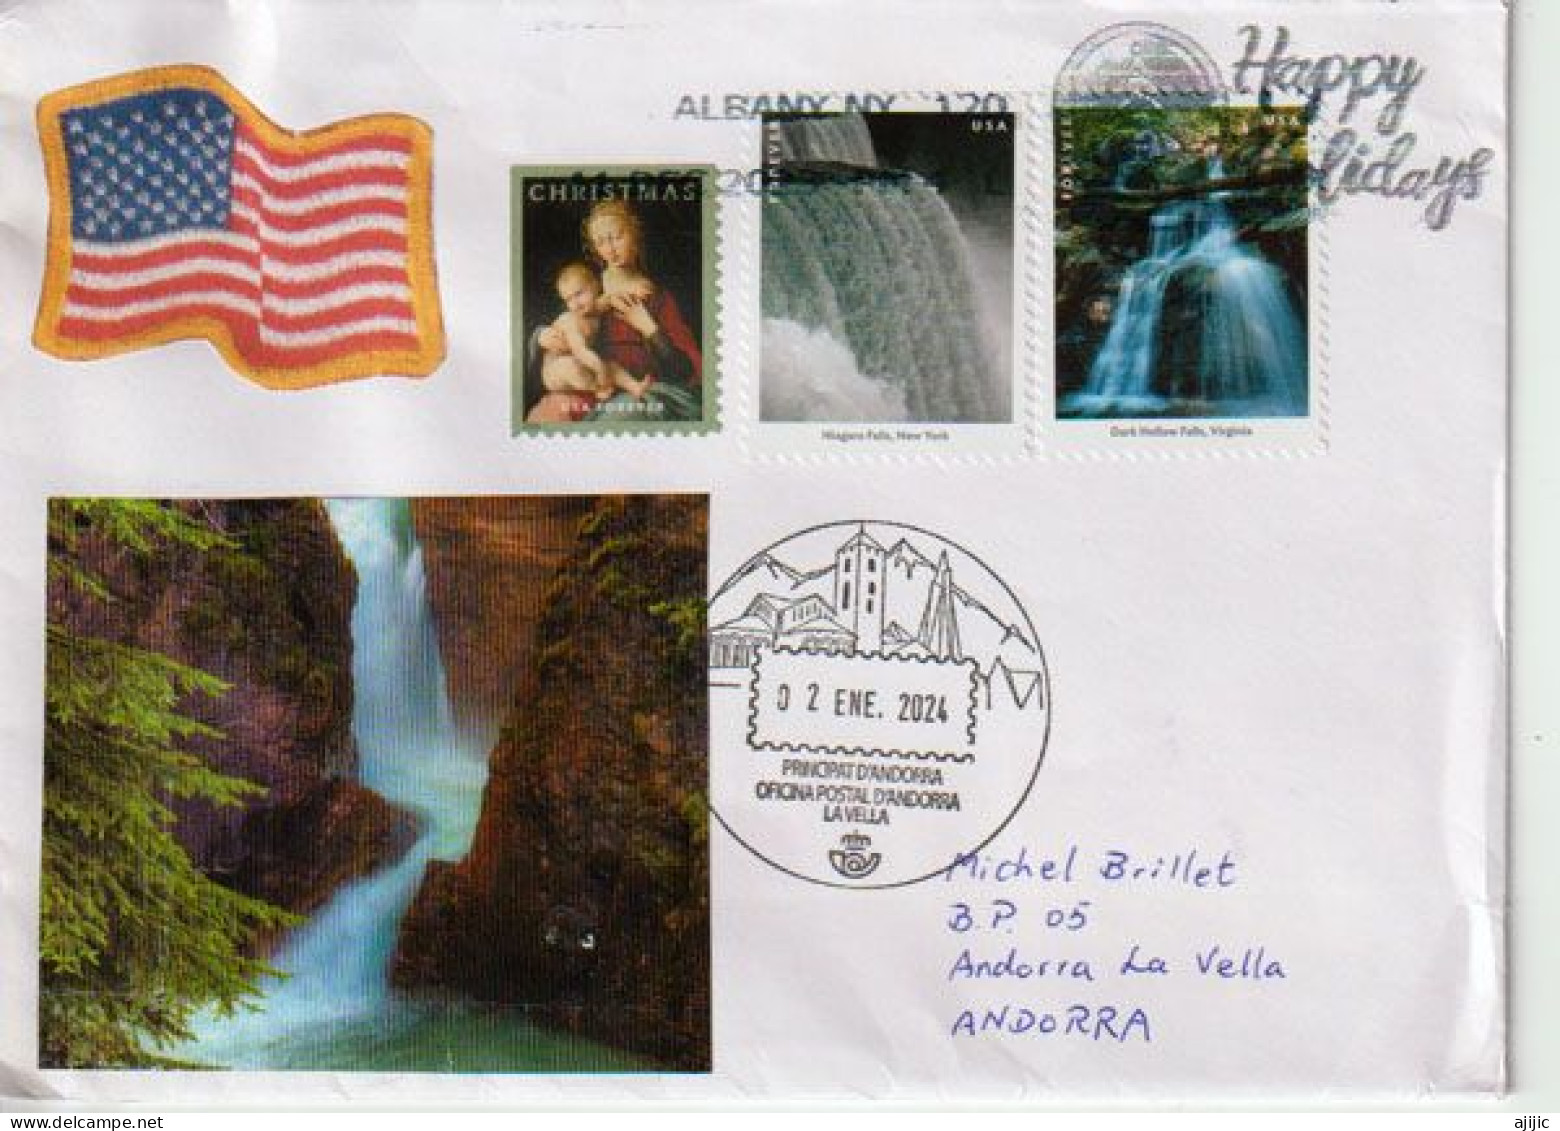 2023. Dark Hollow Falls (Shenandoah National Park) ,Virginia, Letter USA To Andorra (Principality) With Arrival Postmark - Covers & Documents